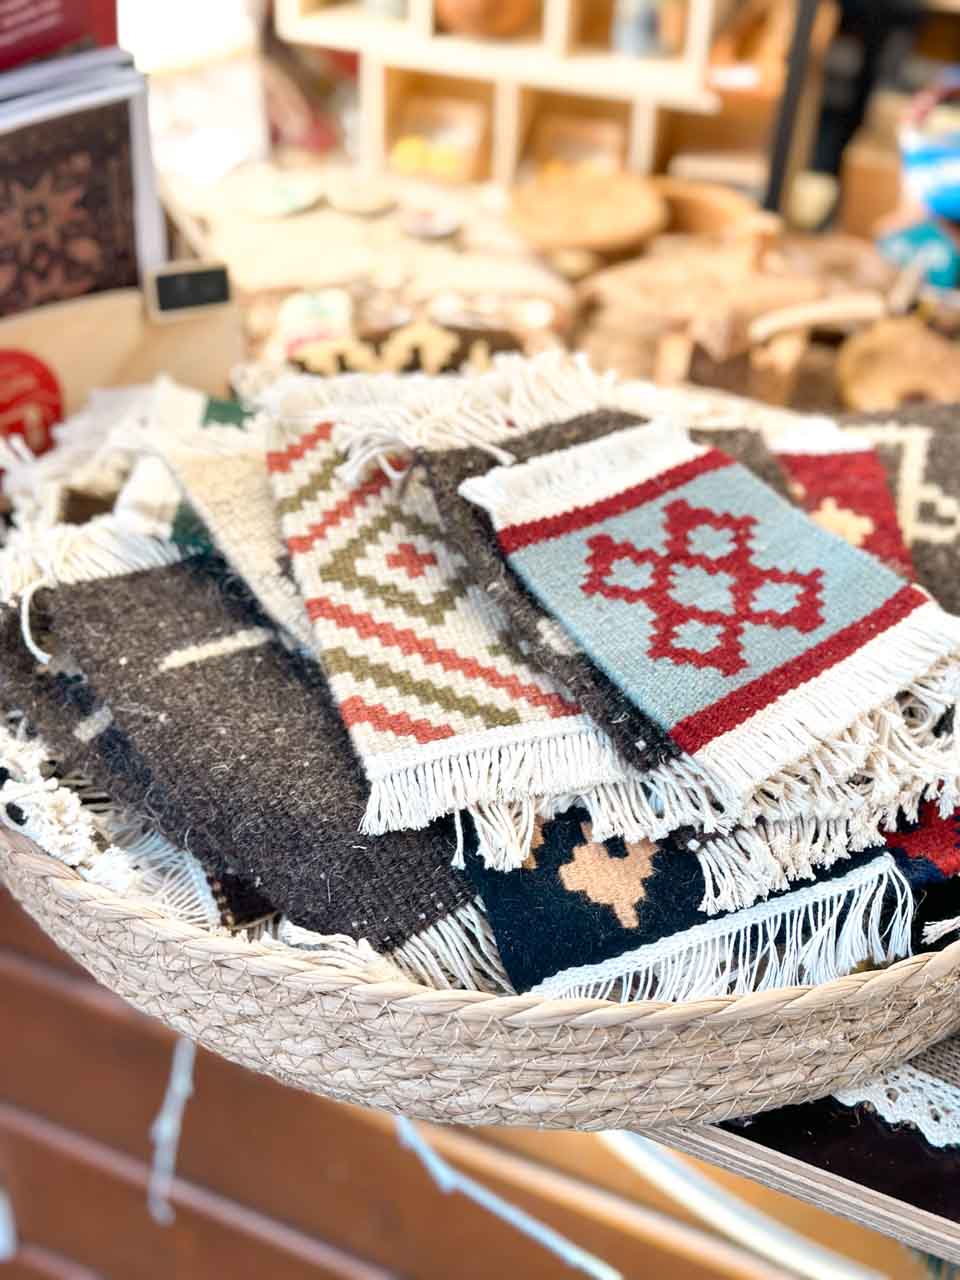 A basket filled with woven handcrafted mittens, showcasing traditional Armenian patterns and designs, at a Christmas market stall in Strasbourg